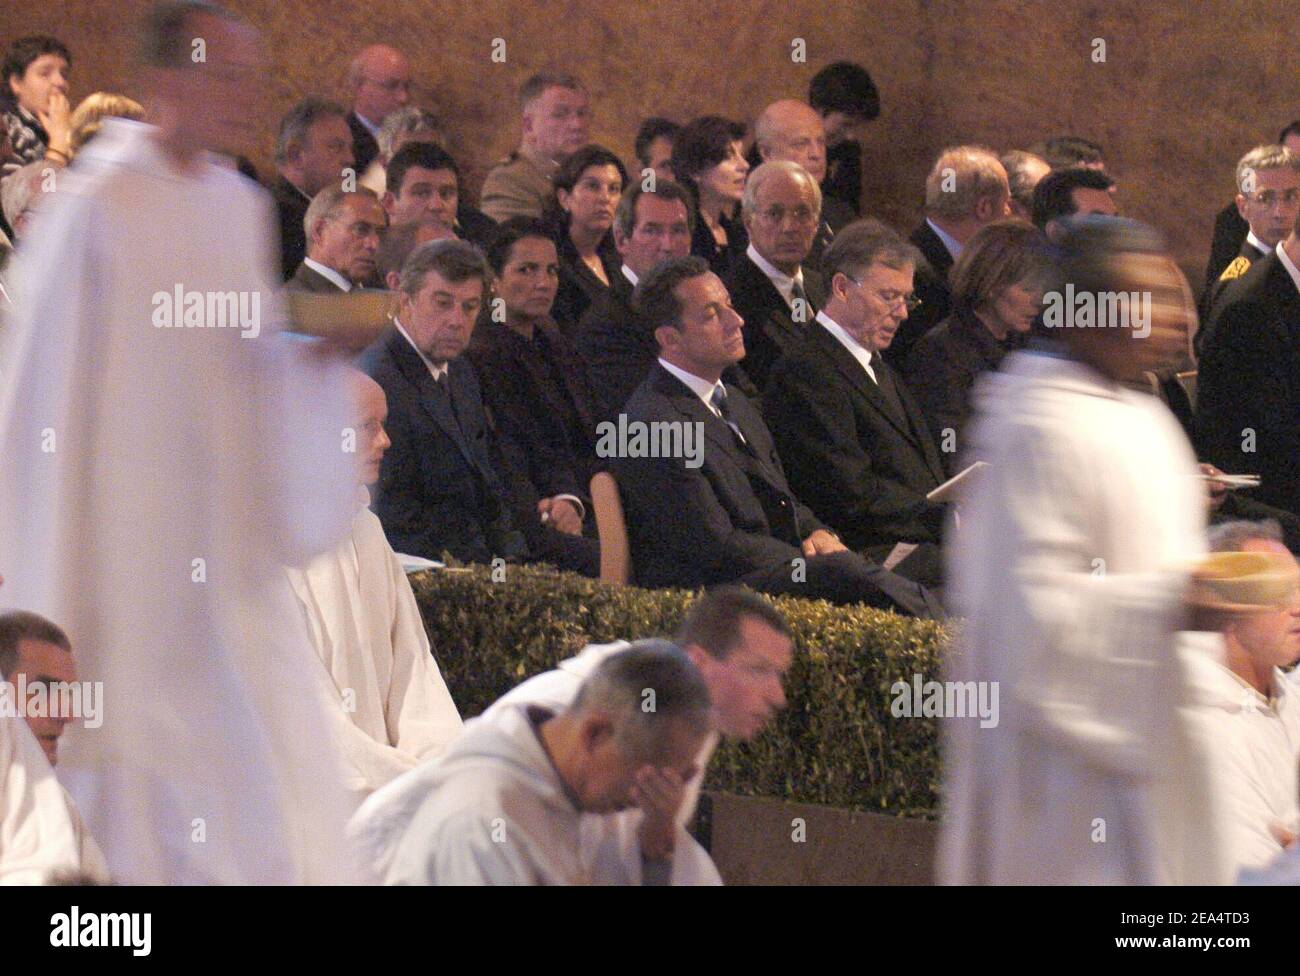 French Interior Minister Nicolas Sarkozy and German President Horst Koehler attend the funeral of Brother Roger Schutz, the leader of the Taize ecumenical community, held at the community's Reconciliation church in Taize, central France, on August 23, 2005. Brother Roger, 90, was slain last week when a 36-year-old mentally disturbed Romanian woman slit his throat in front of 2,500 pilgrims praying at the church. Photo by Bruno Klein/ABACAPRESS.COM Stock Photo